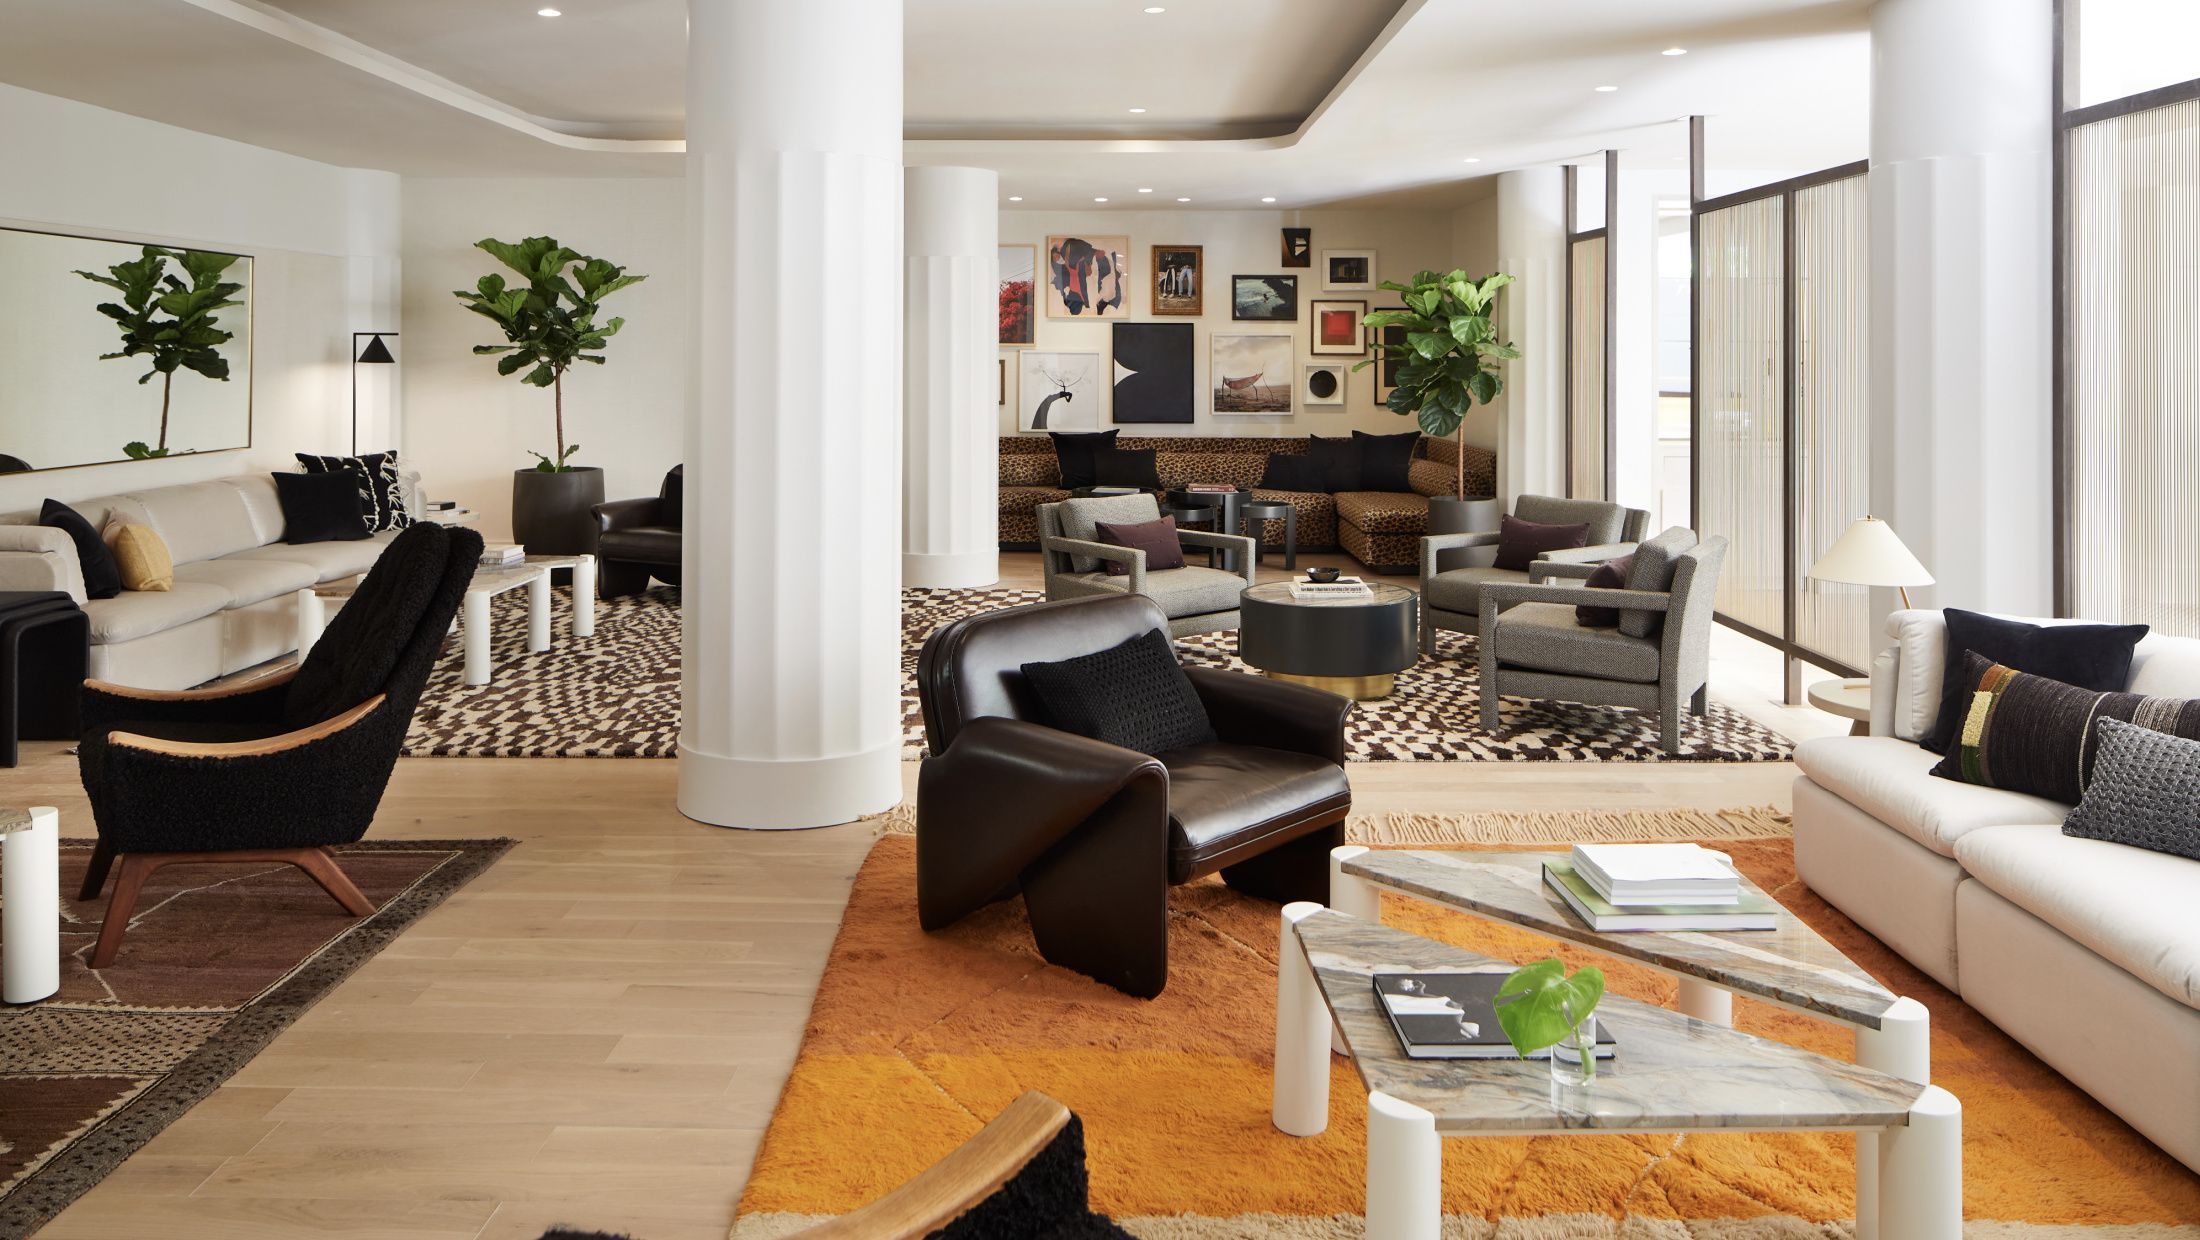 lobby living room with white couches, brown leather seating, white columns